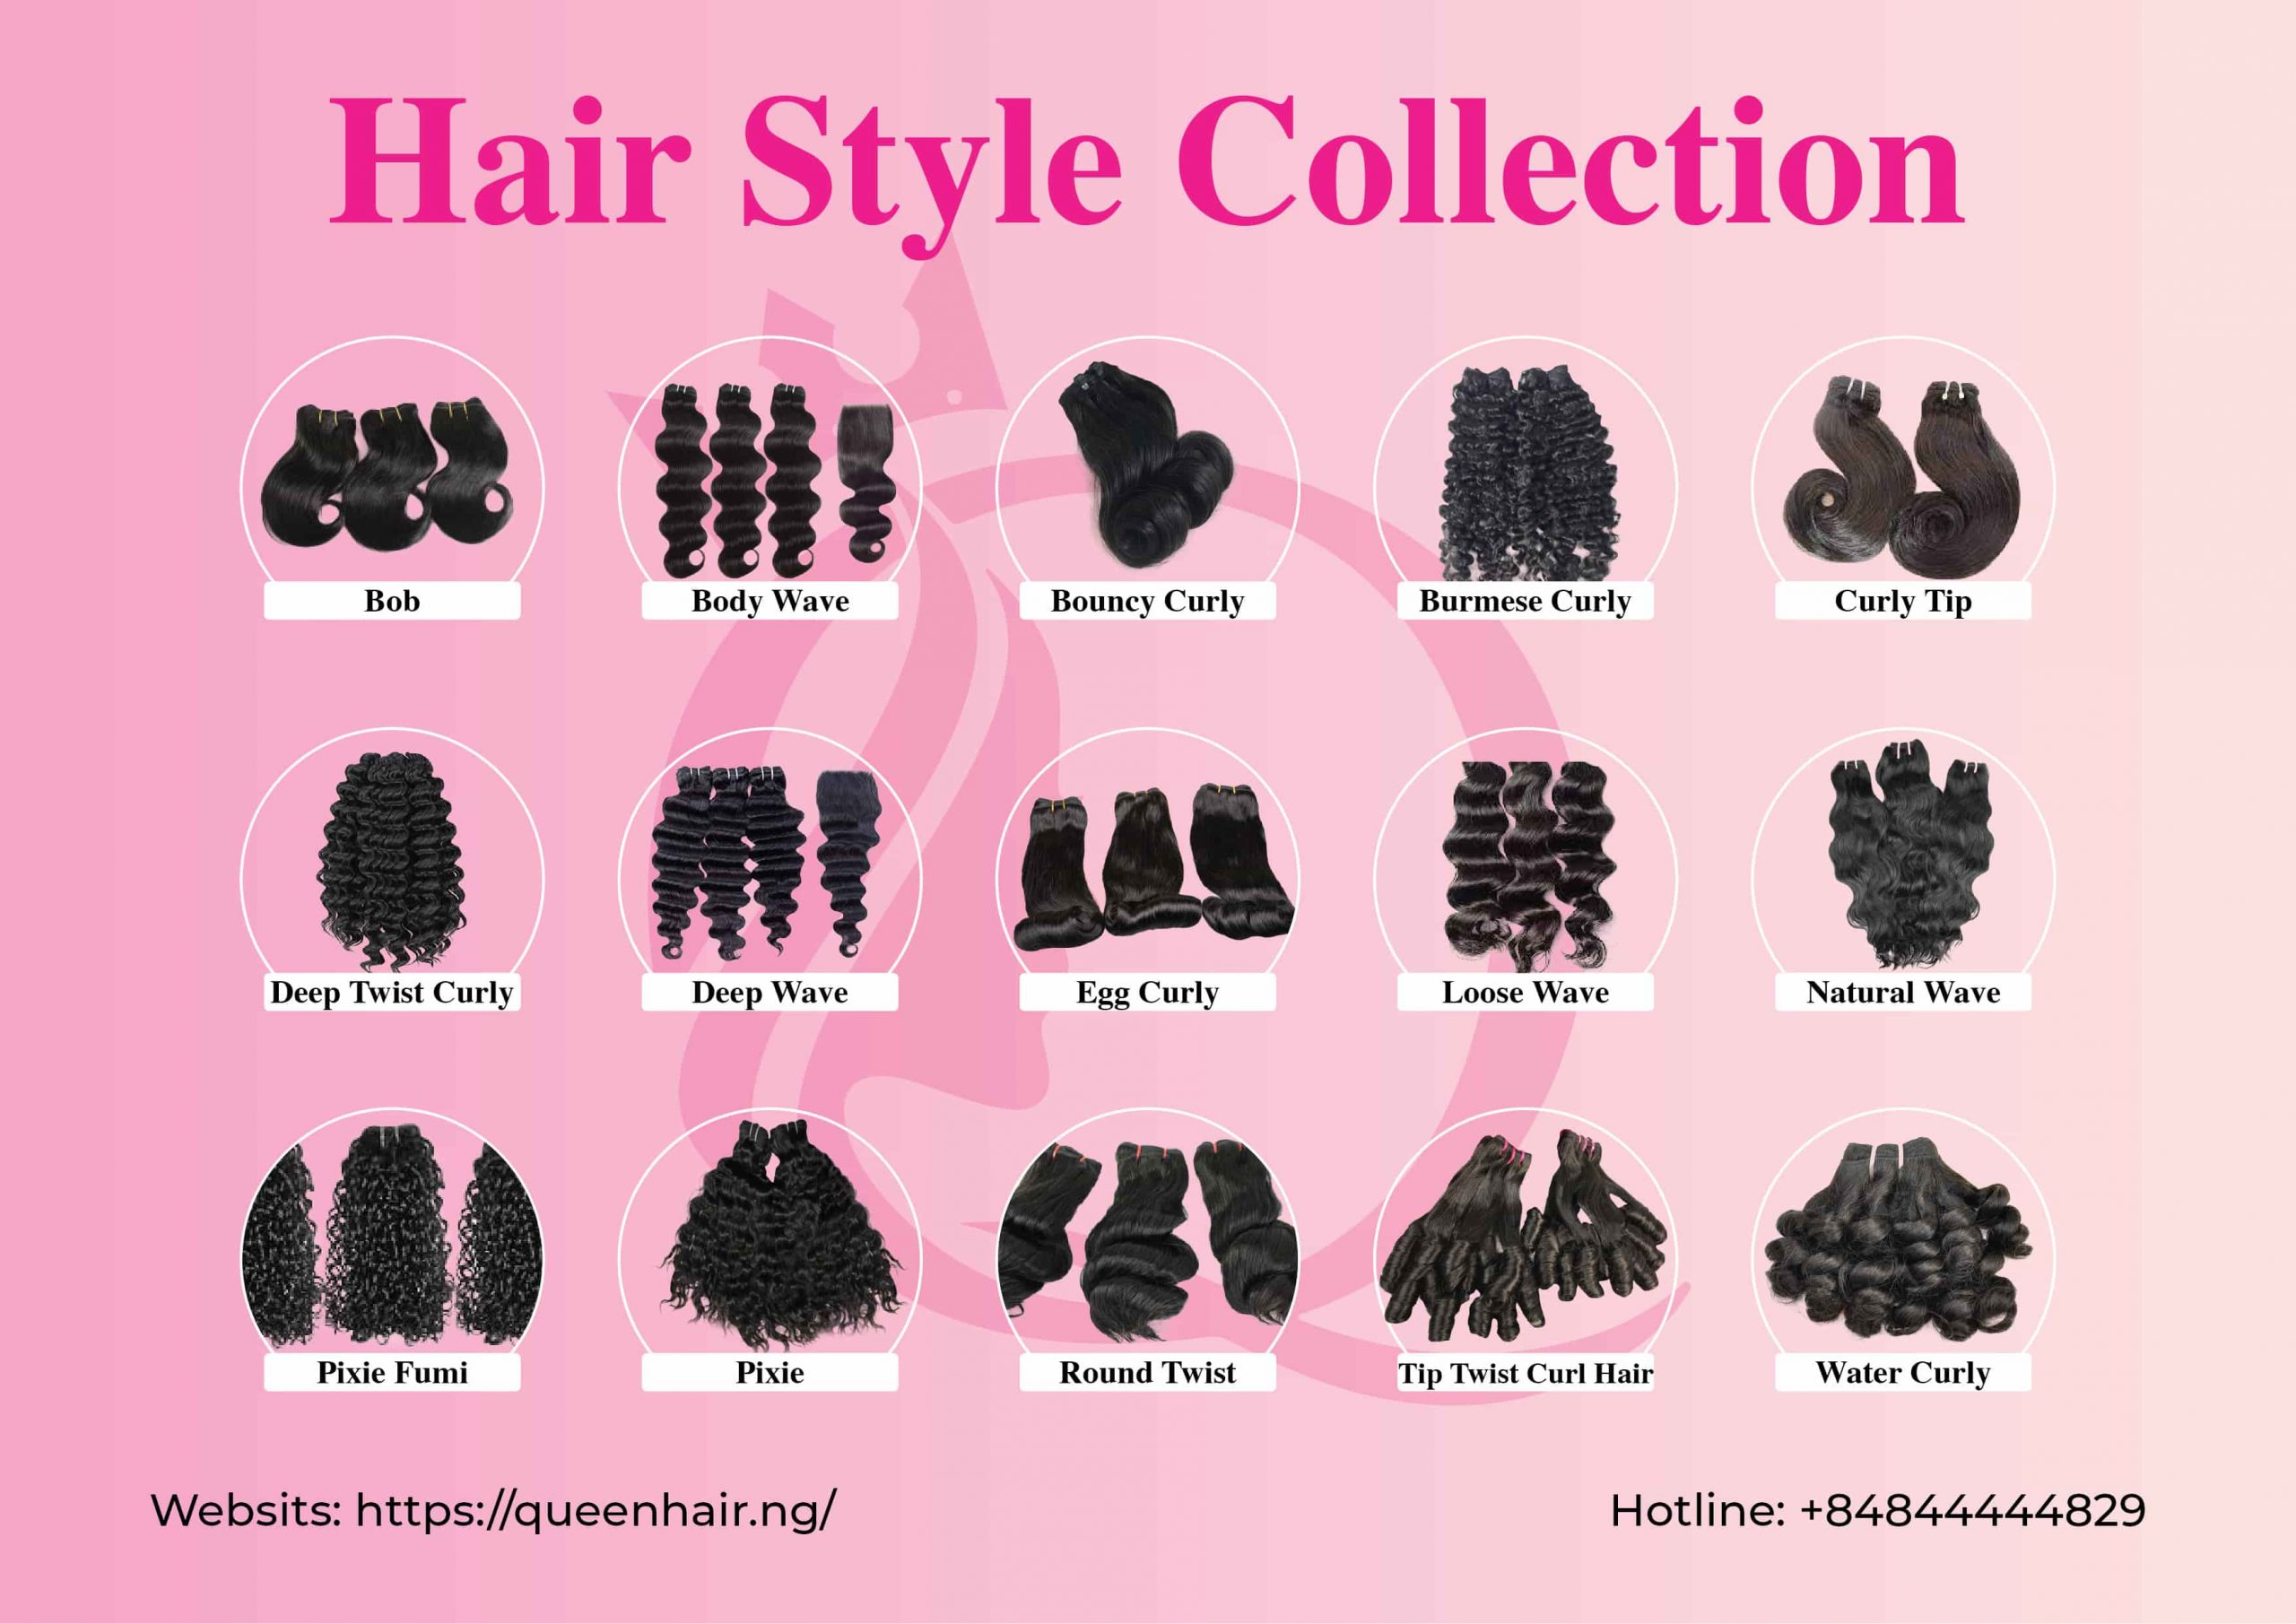 Hair-Style-collection-Queen-Hair